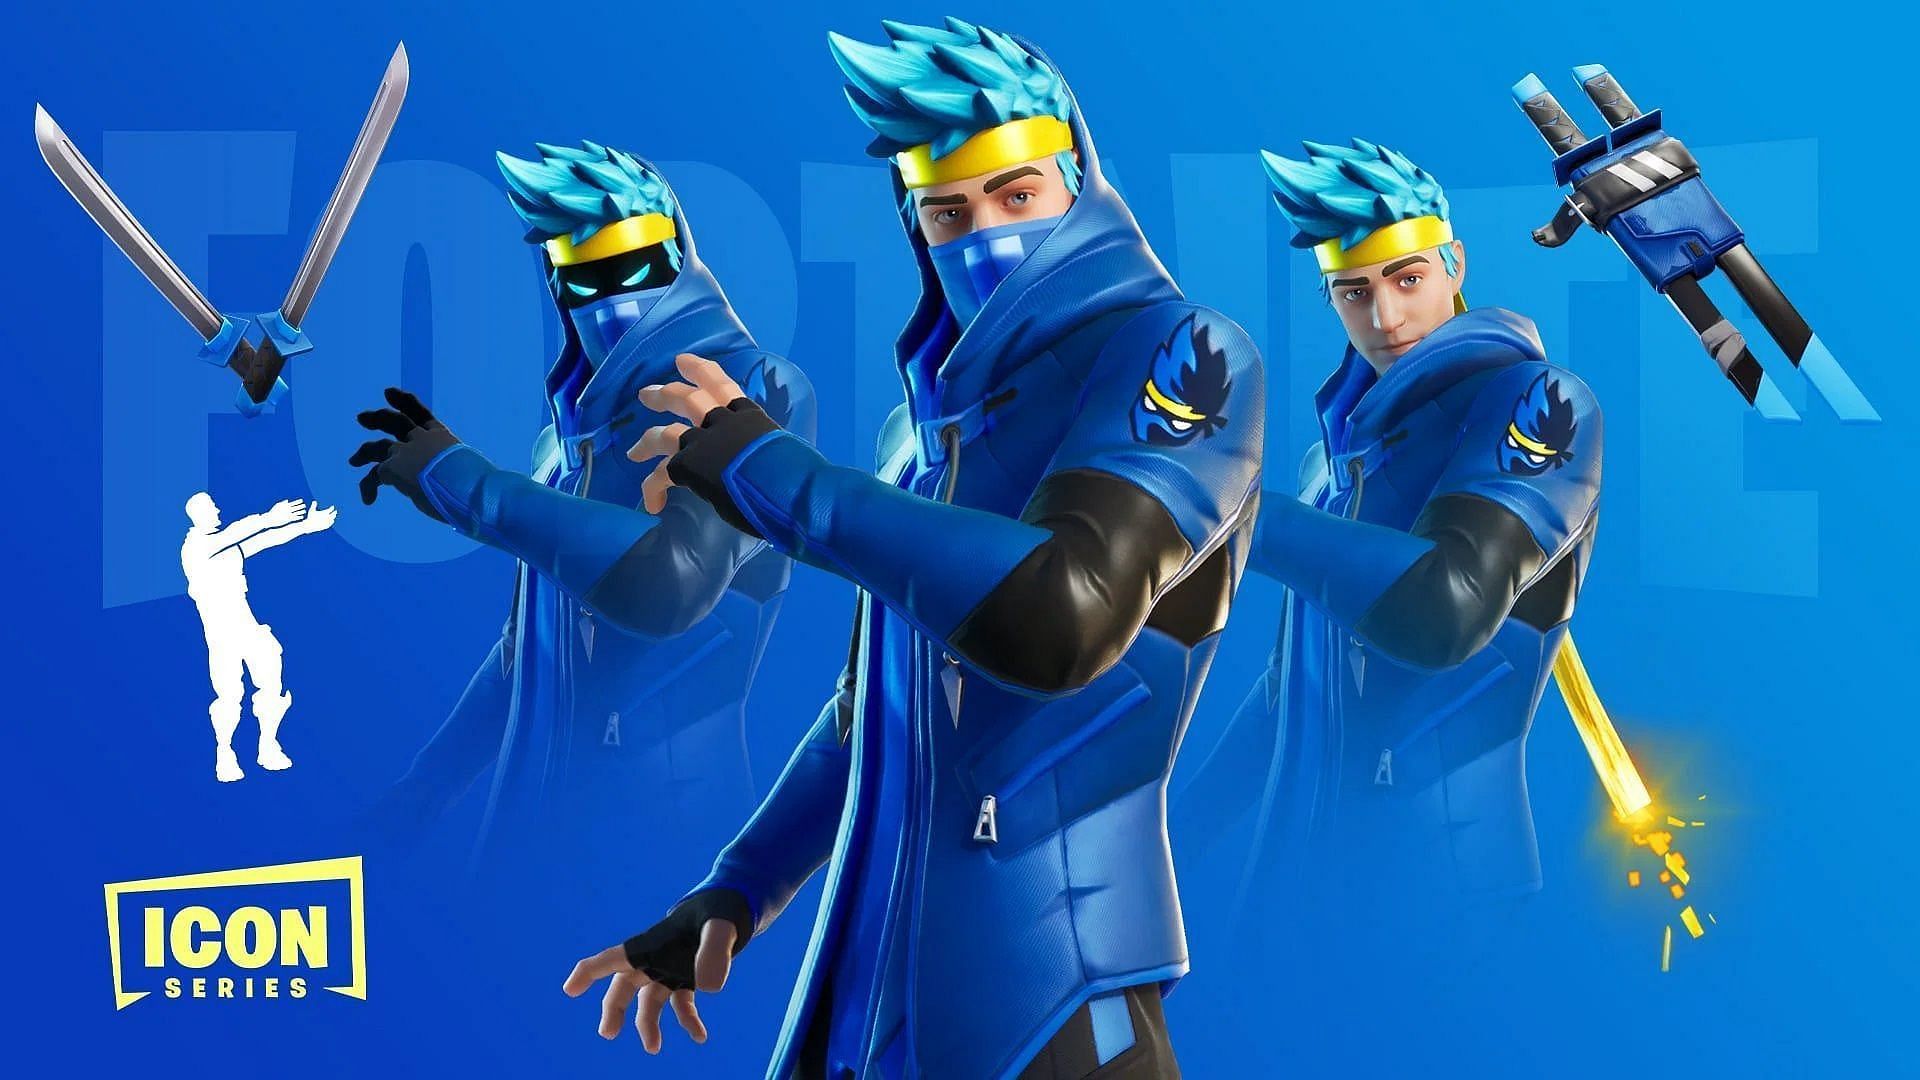 Ninja is one of the popular Fortnite streamers who got banned (Image via Epic Games)